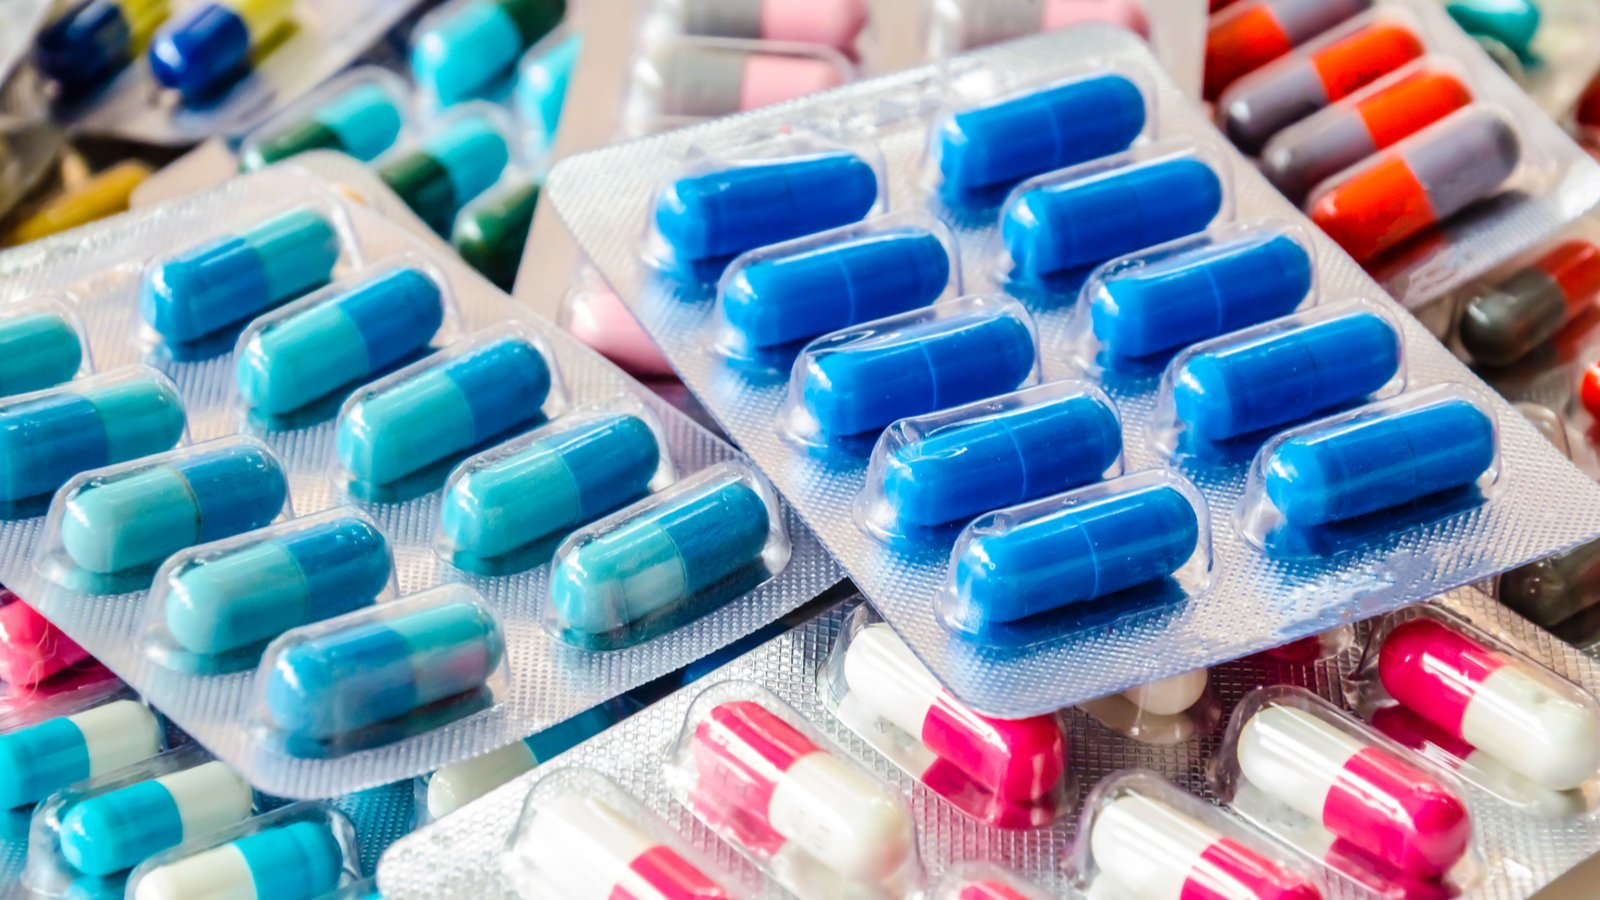 Packs of blue and pink pills are piled on top of each other representing CING stock.